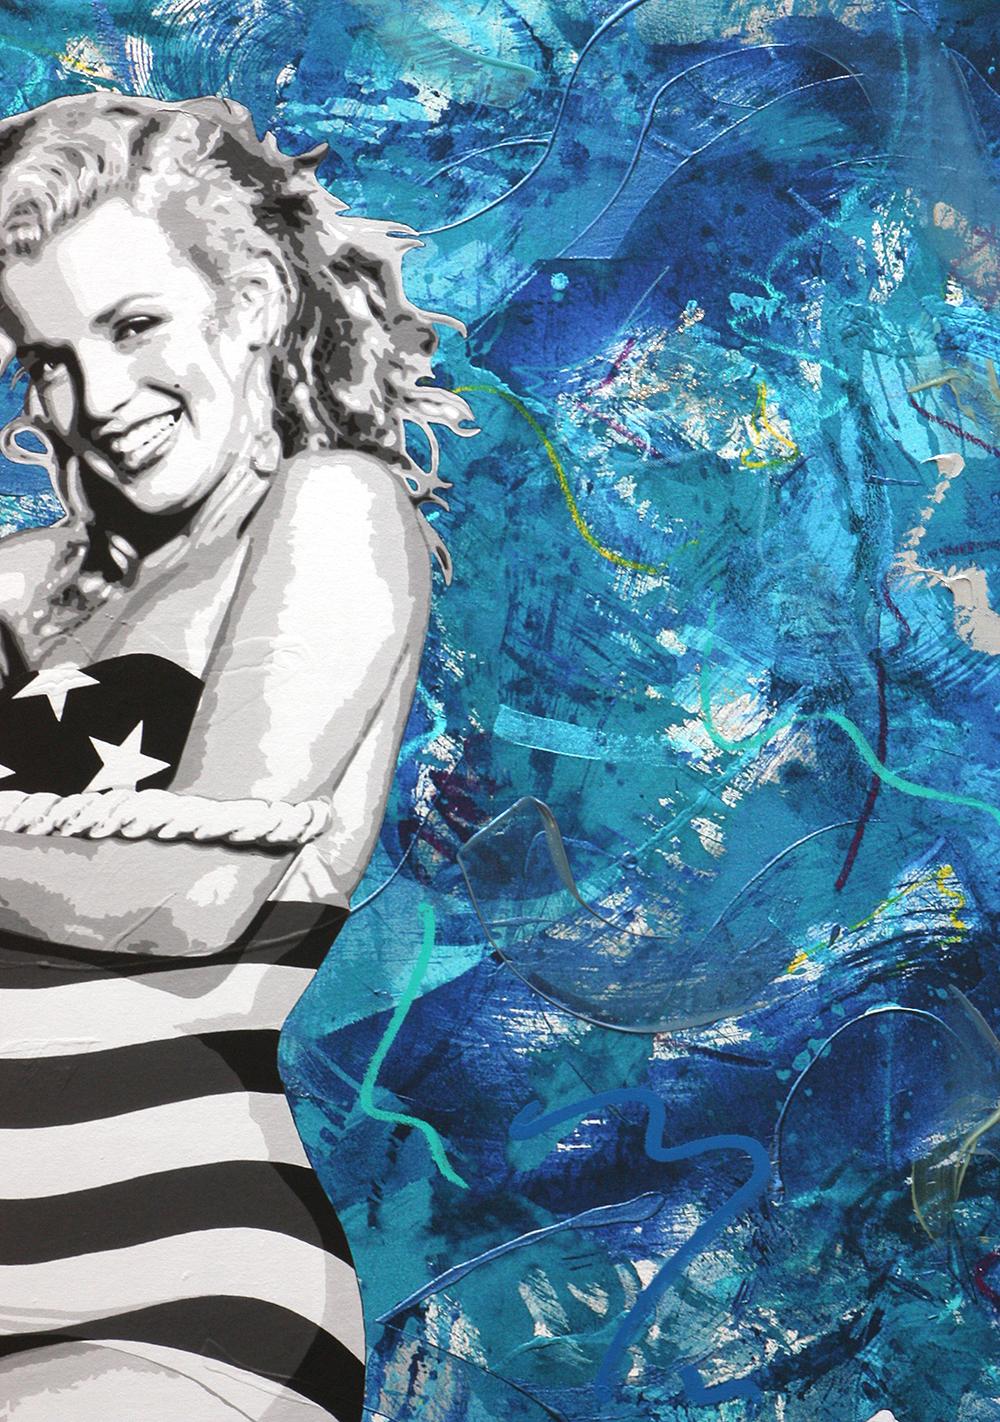 Young Marilyn Monroe at the Beach tug of war  40x50 acrylic & mixed media canvas - Pop Art Painting by Ceravolo